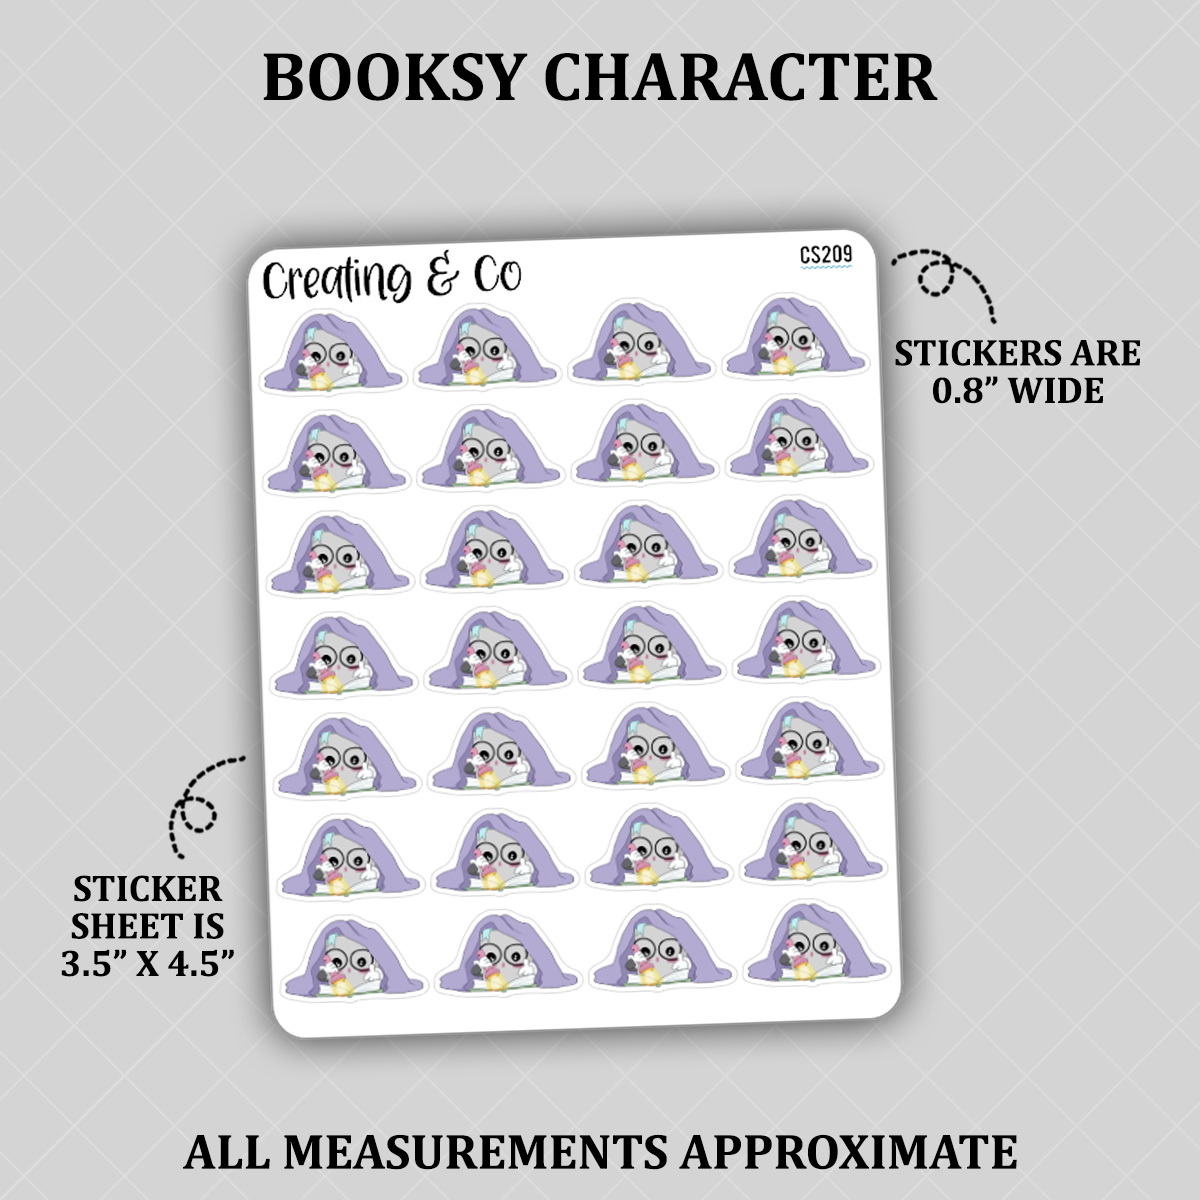 Sneaky Reading Booksy Character Functional Stickers - CS209